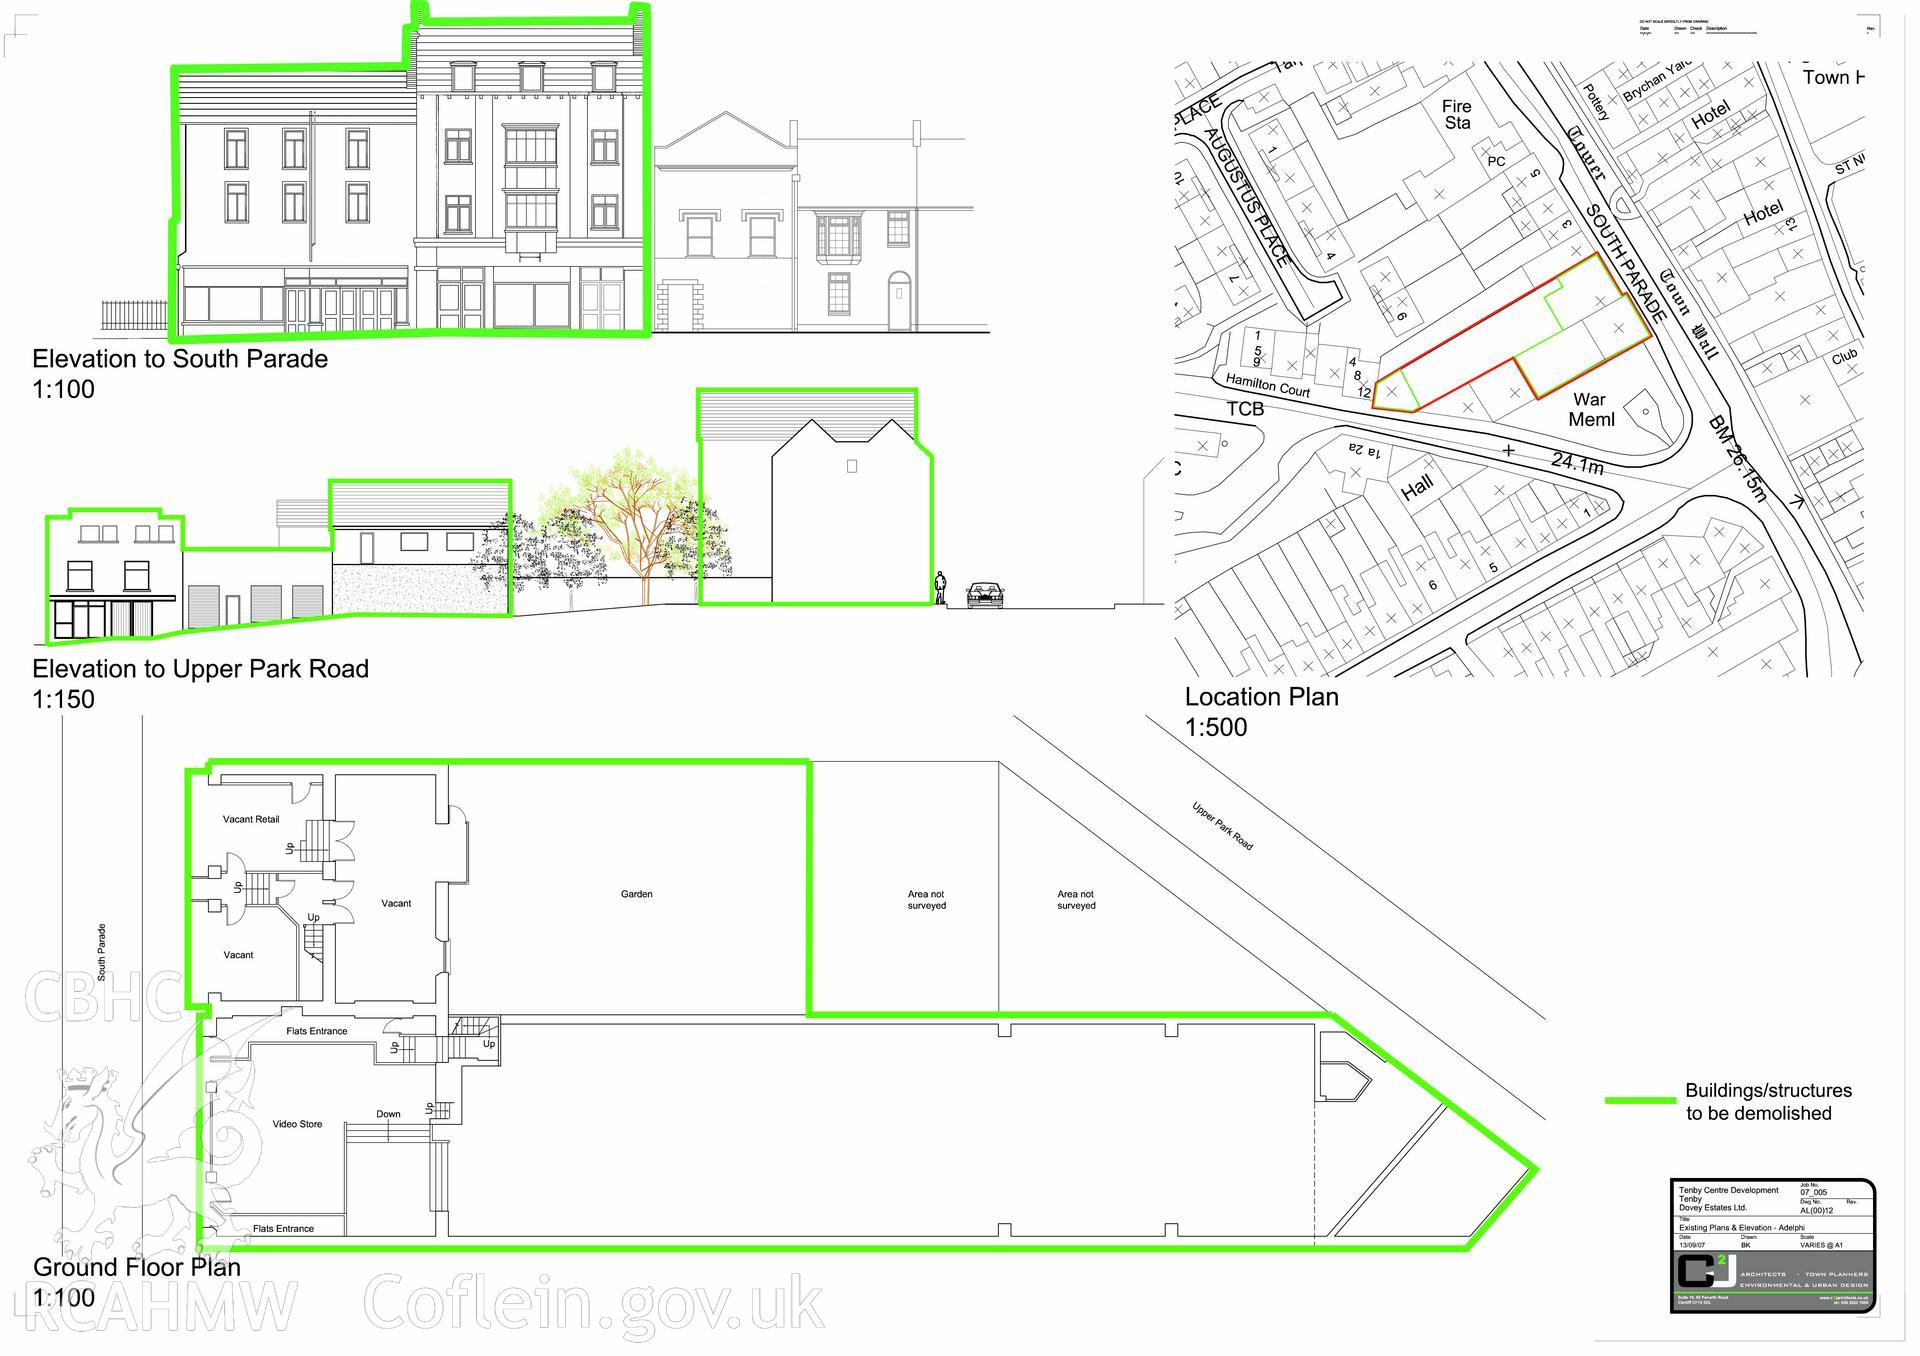 Digital plans for Tenby Centre Development - existing plans and elevations - Adelphi